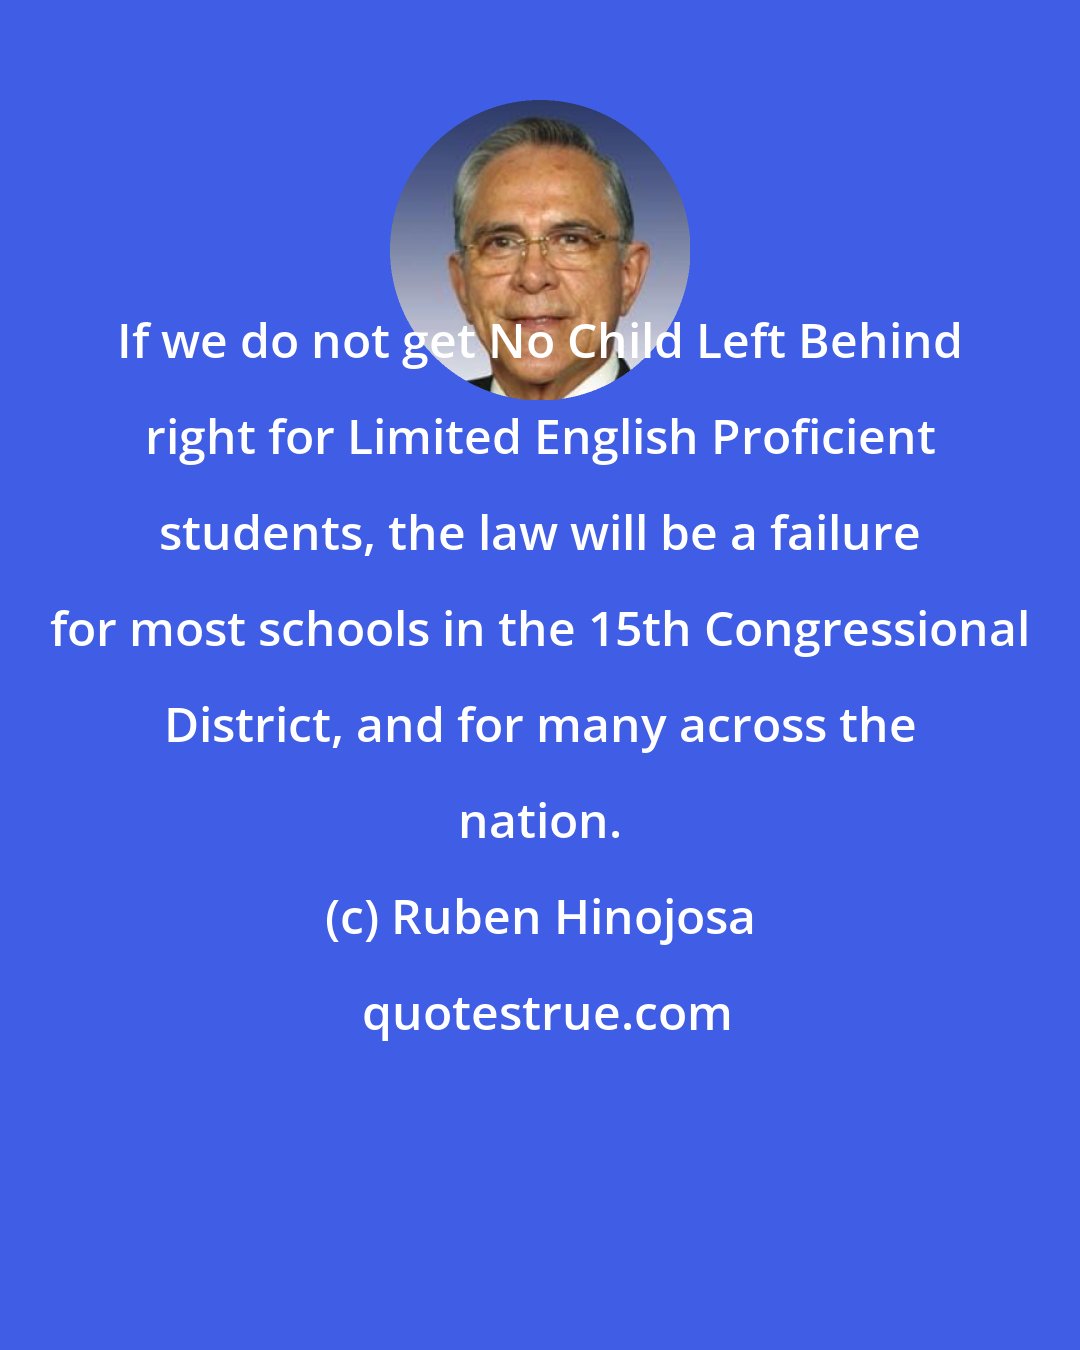 Ruben Hinojosa: If we do not get No Child Left Behind right for Limited English Proficient students, the law will be a failure for most schools in the 15th Congressional District, and for many across the nation.